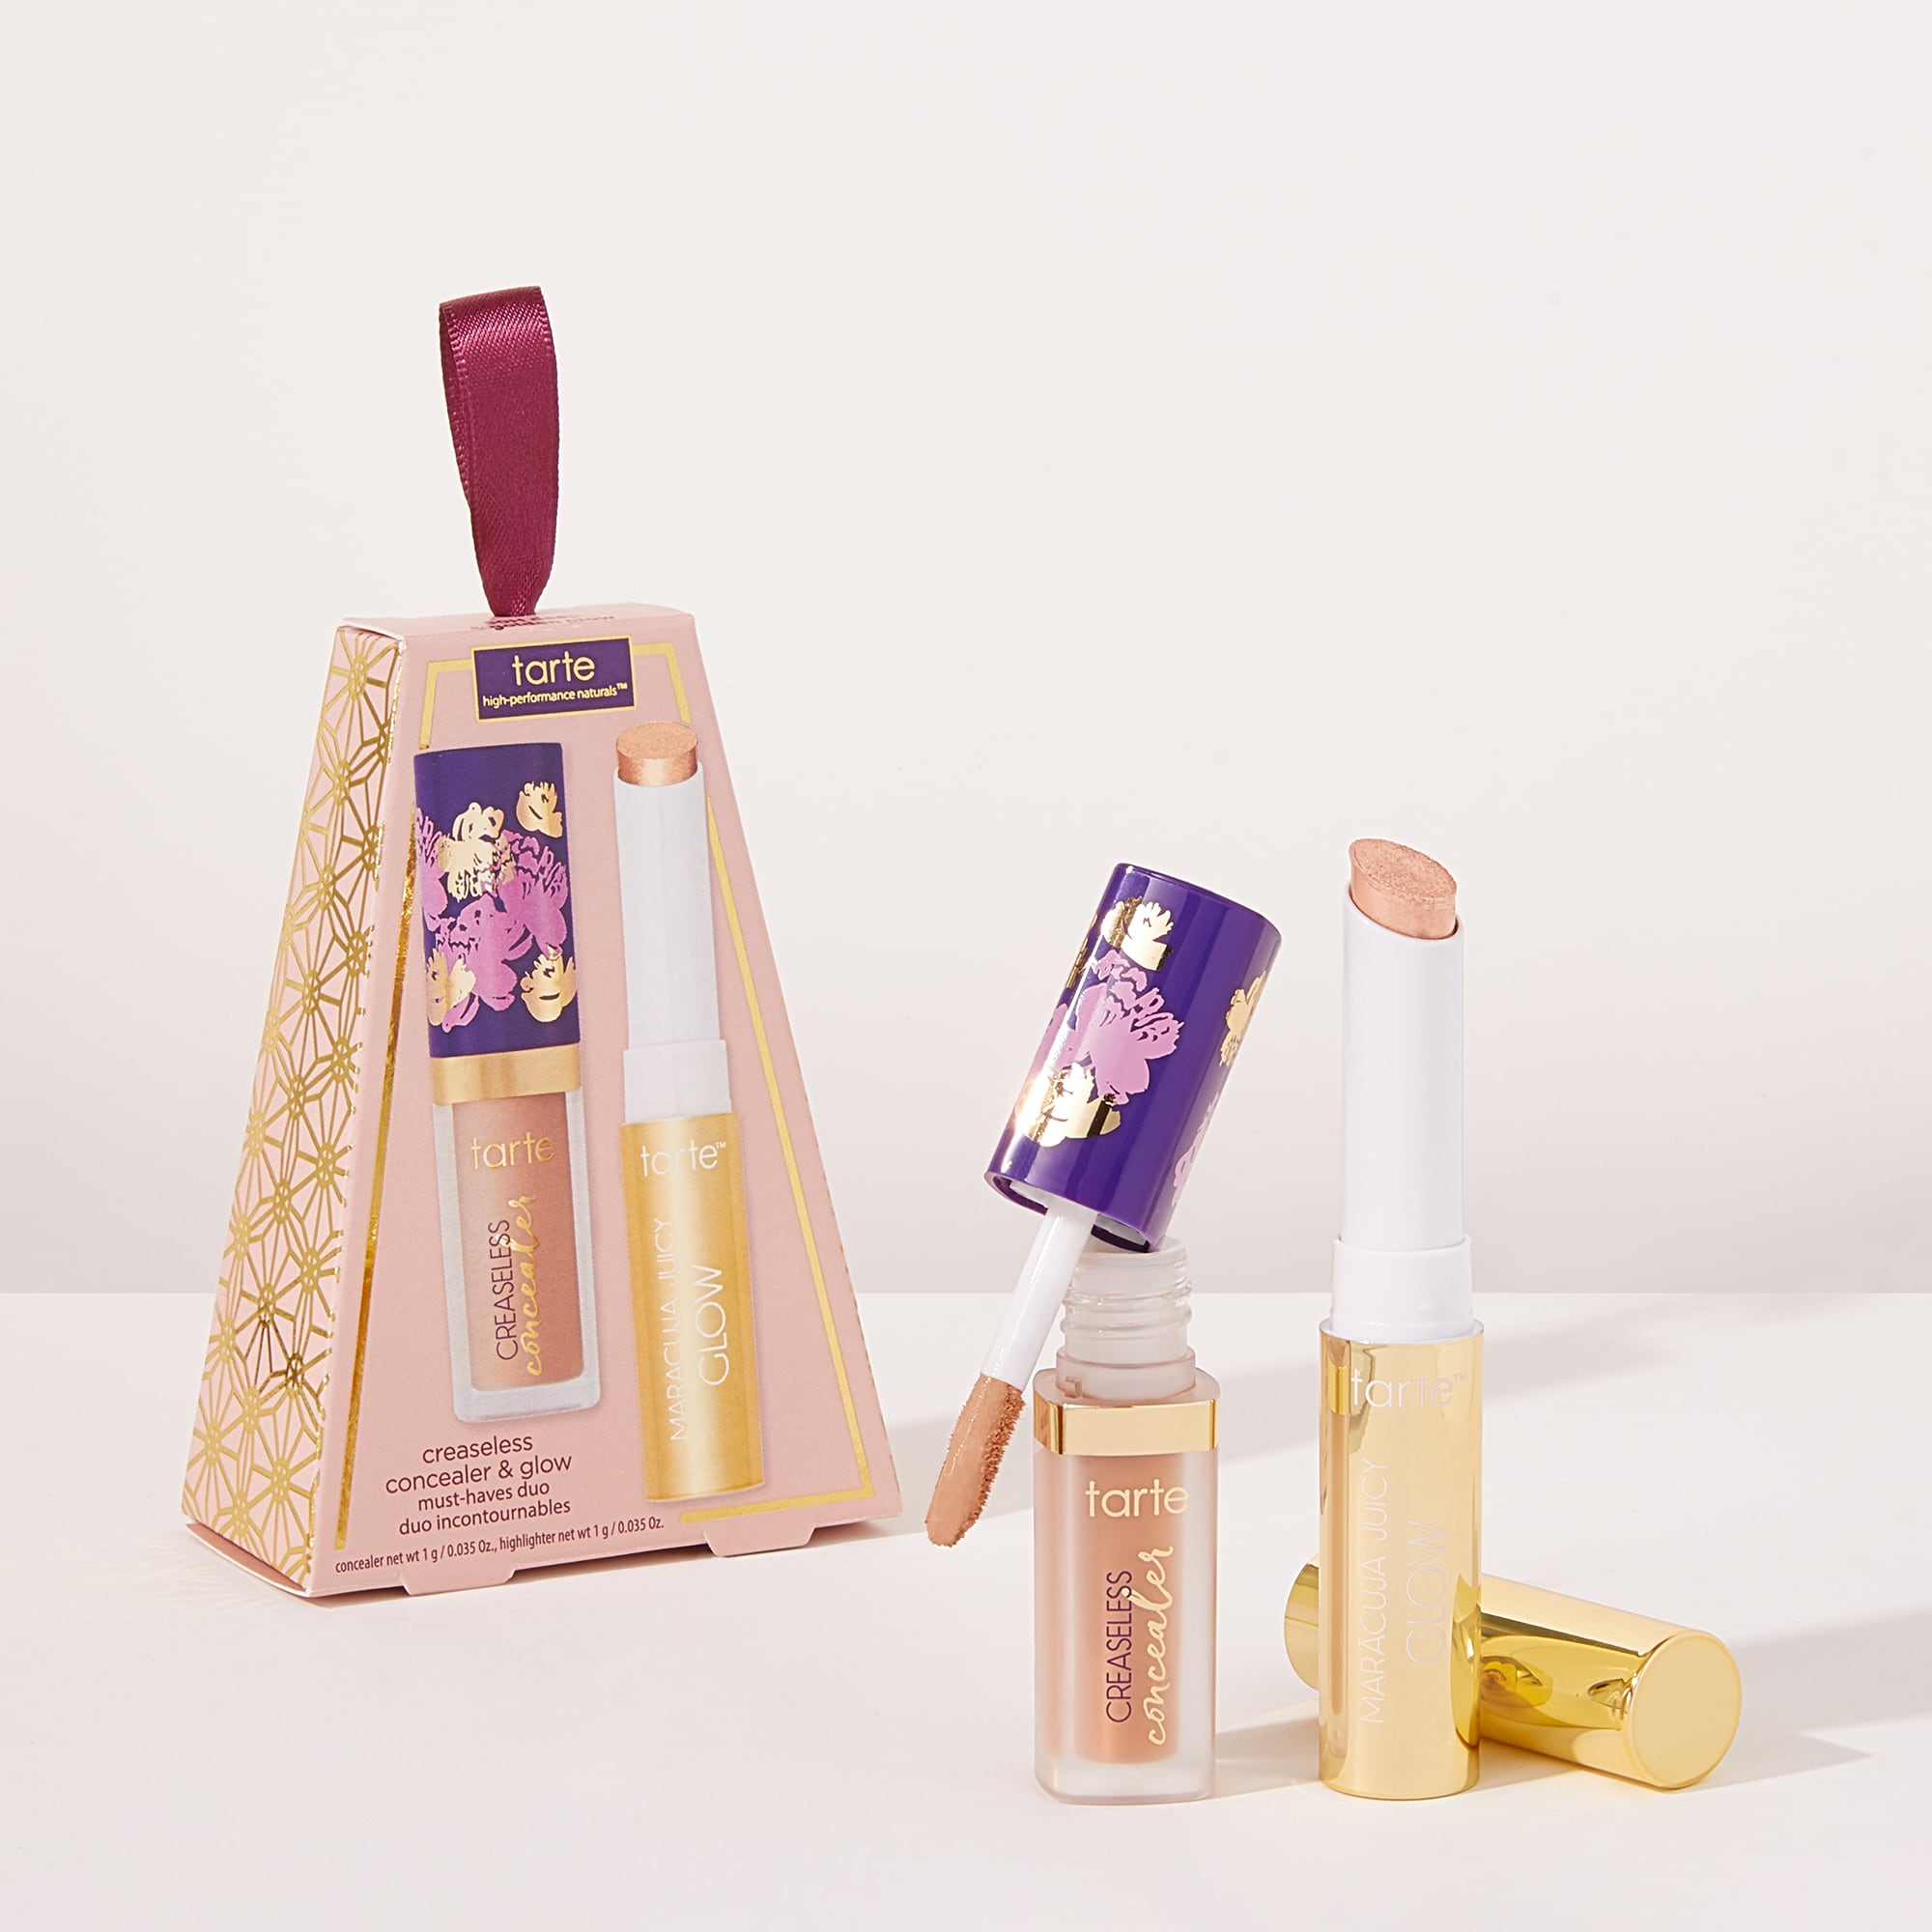 Tarte Cosmetics Creaseless Concealer & Glow Must-haves Duo In White